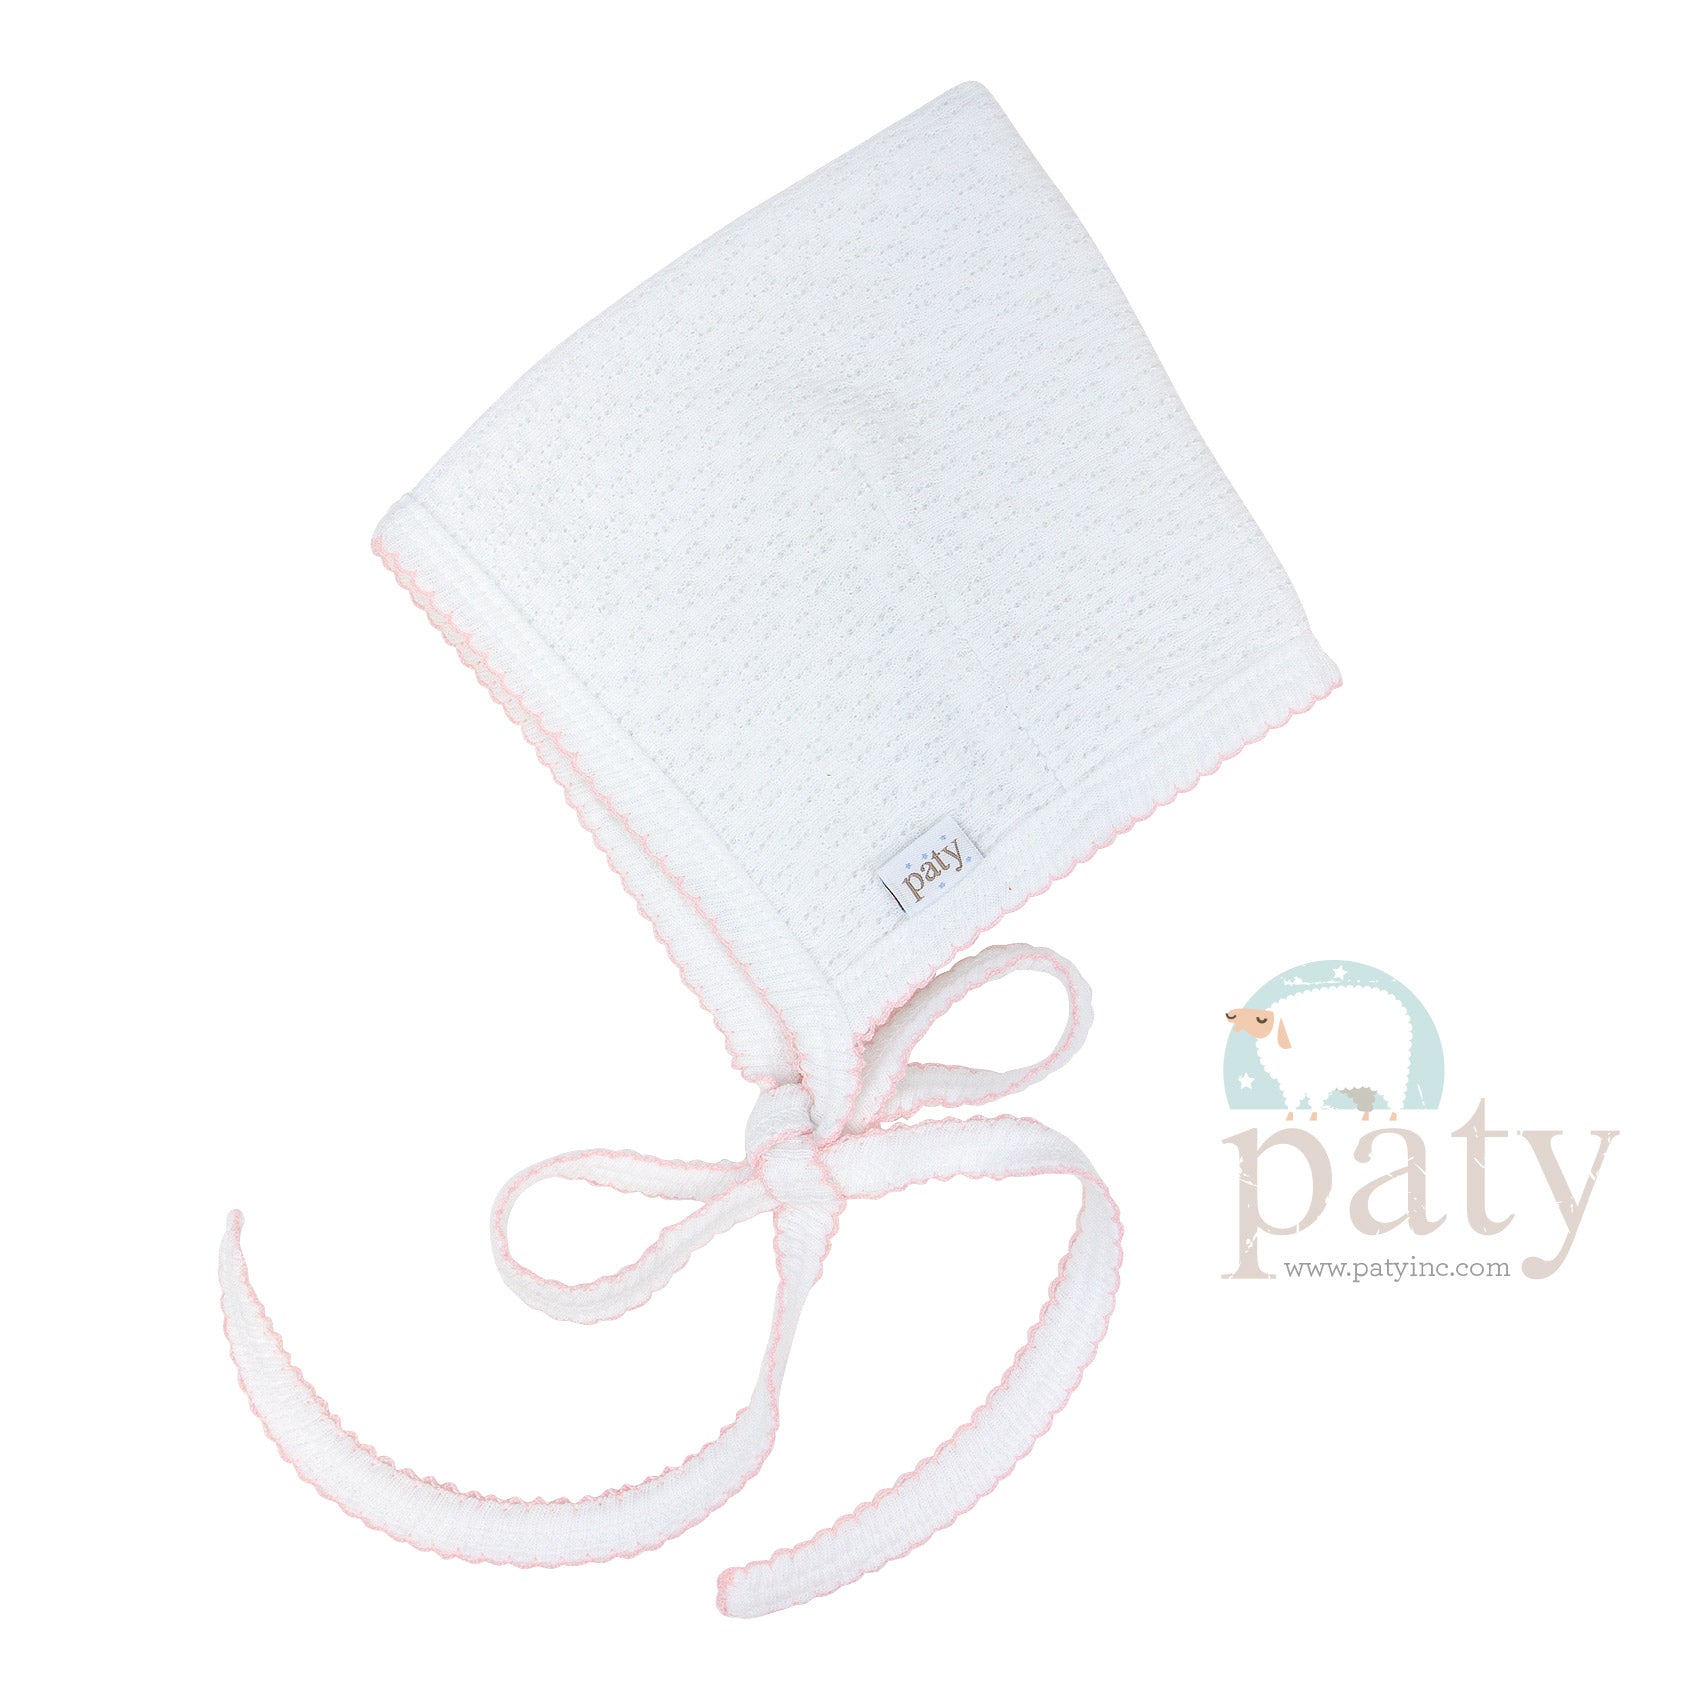 A comfortable Paty Knit bonnet for a baby with pink trim.